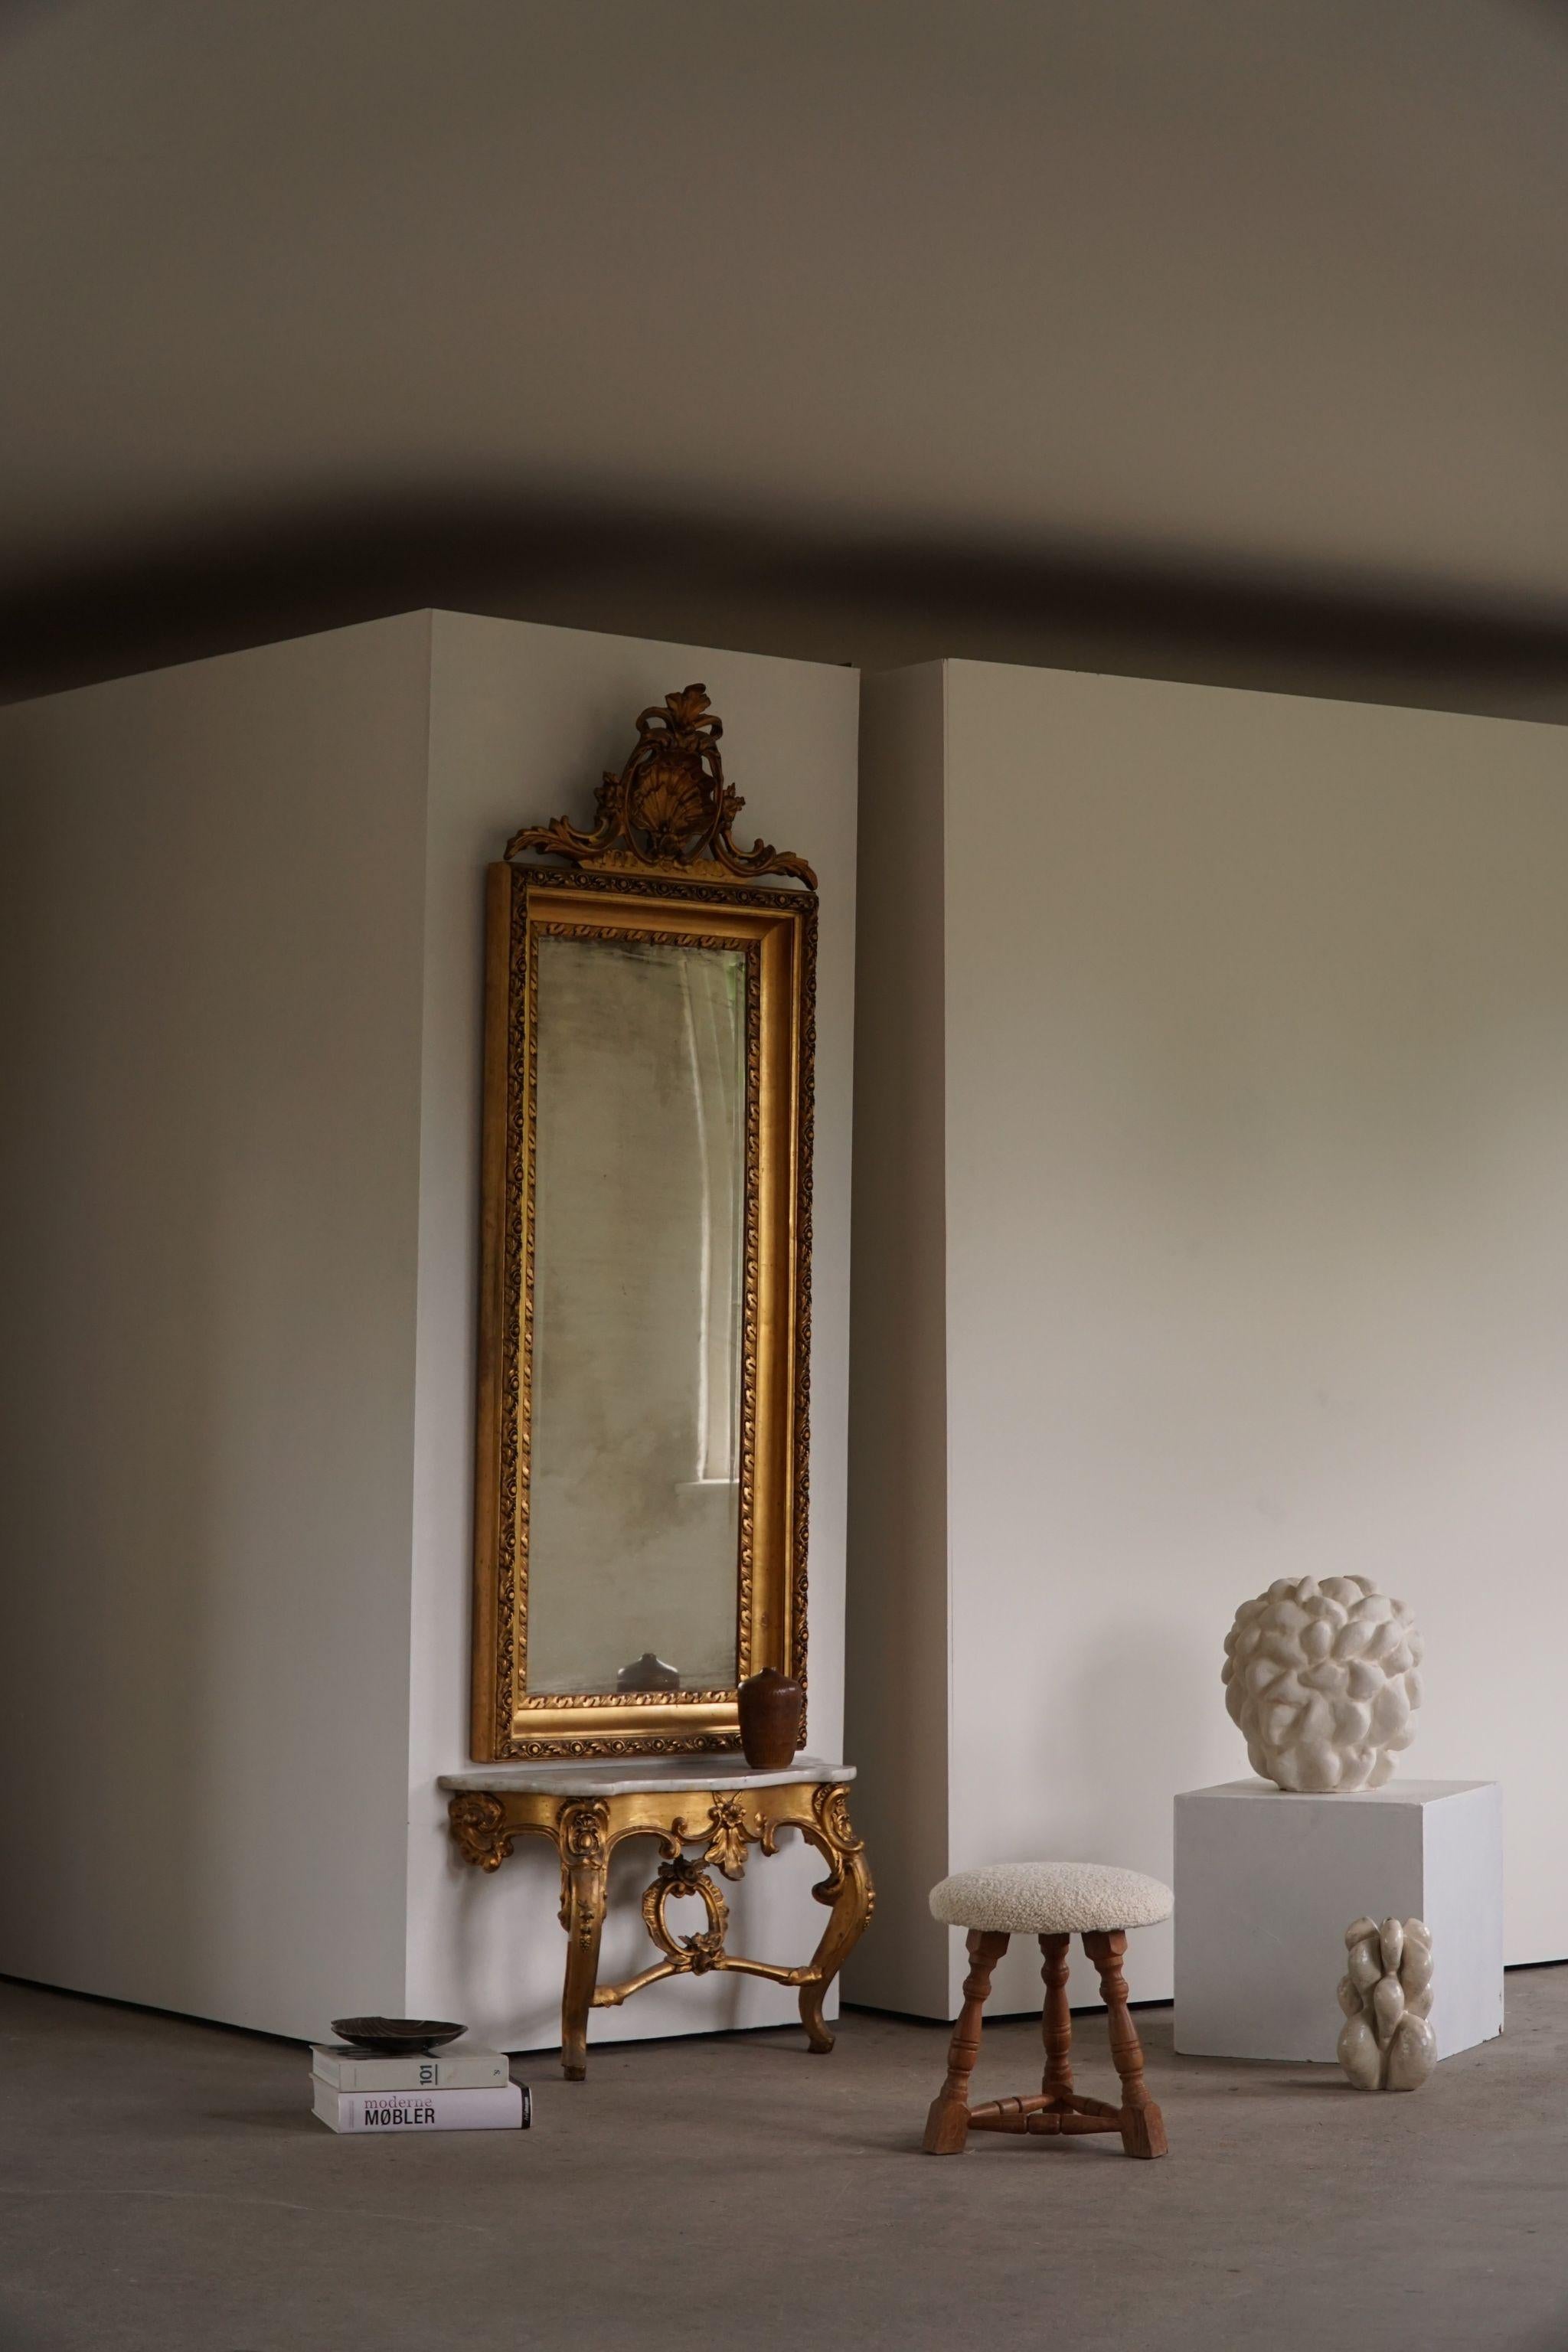 Antique Danish Mid-19th Century Rococo Gold Plated Mirror For Sale 12